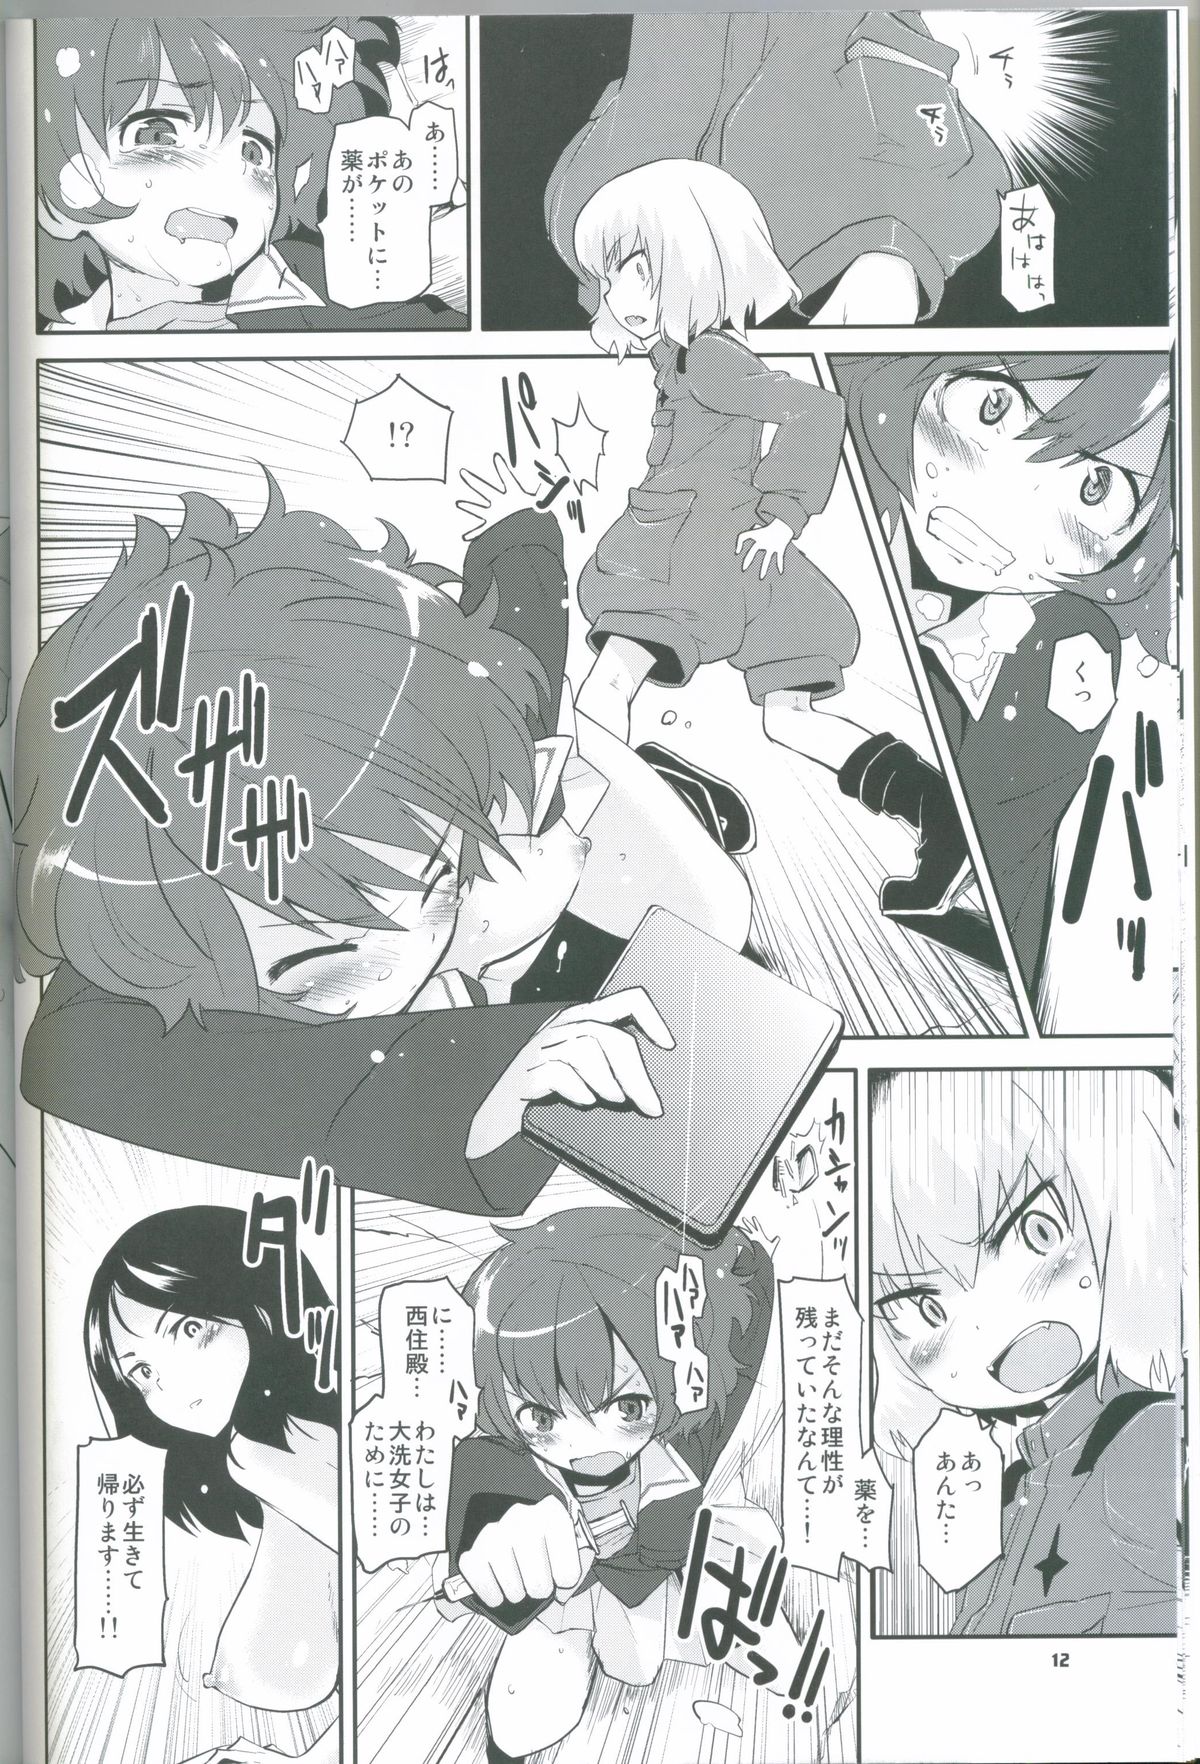 (COMIC1☆7) [Peθ (Mozu)] The General Frost Has Come! (Girls und Panzer) page 11 full